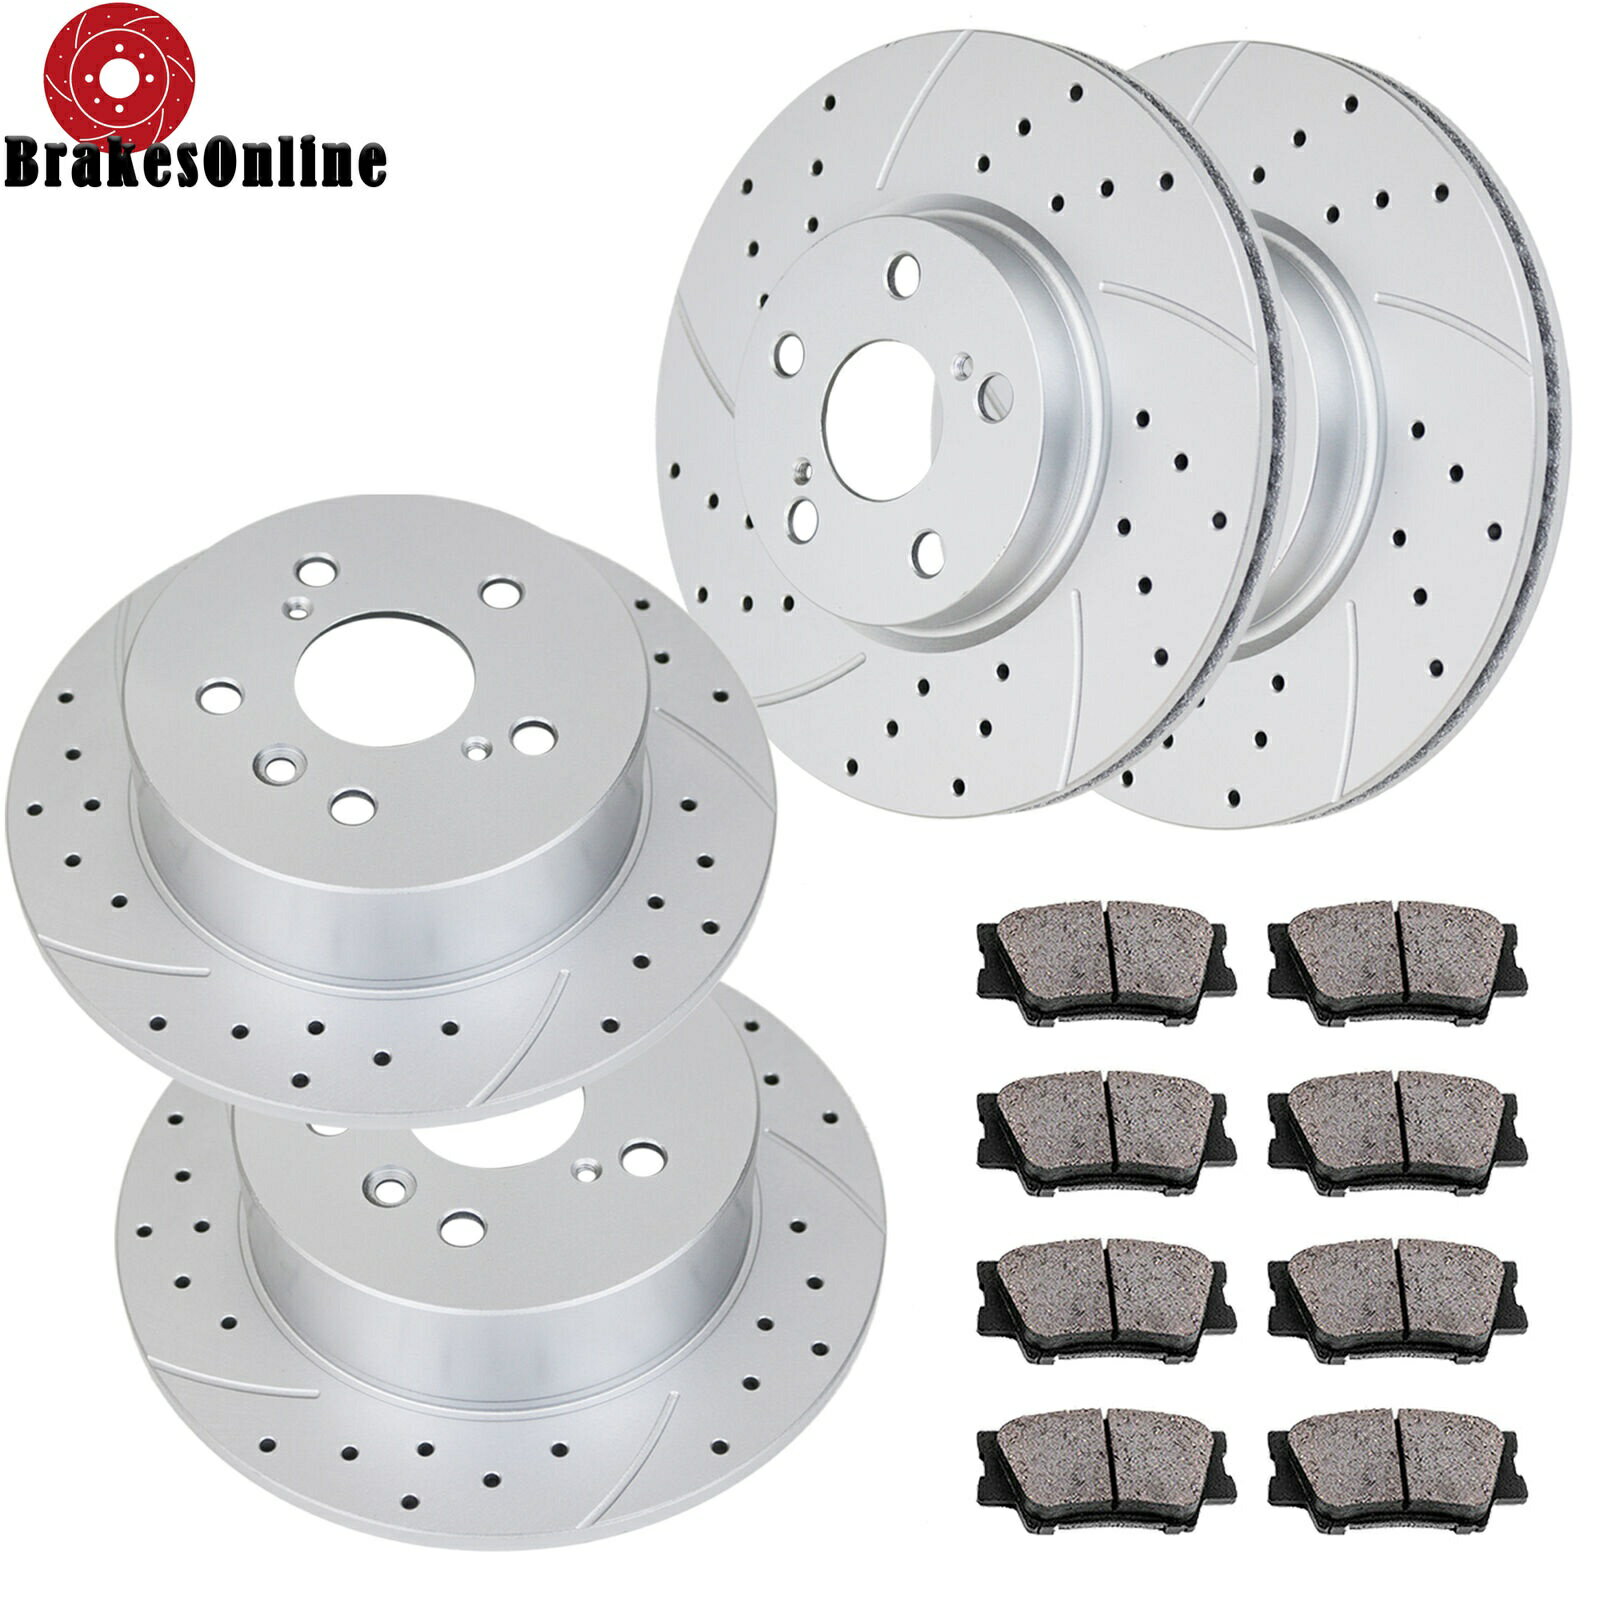 brake disc rotor トヨタカムリアバロンブレーキ用のドリルスロットスロットフロントリアブレーキローターとパッド Drilled Slotted Front Rear Brake Rotors and Pads for Toyota Camry Avalon Brakes